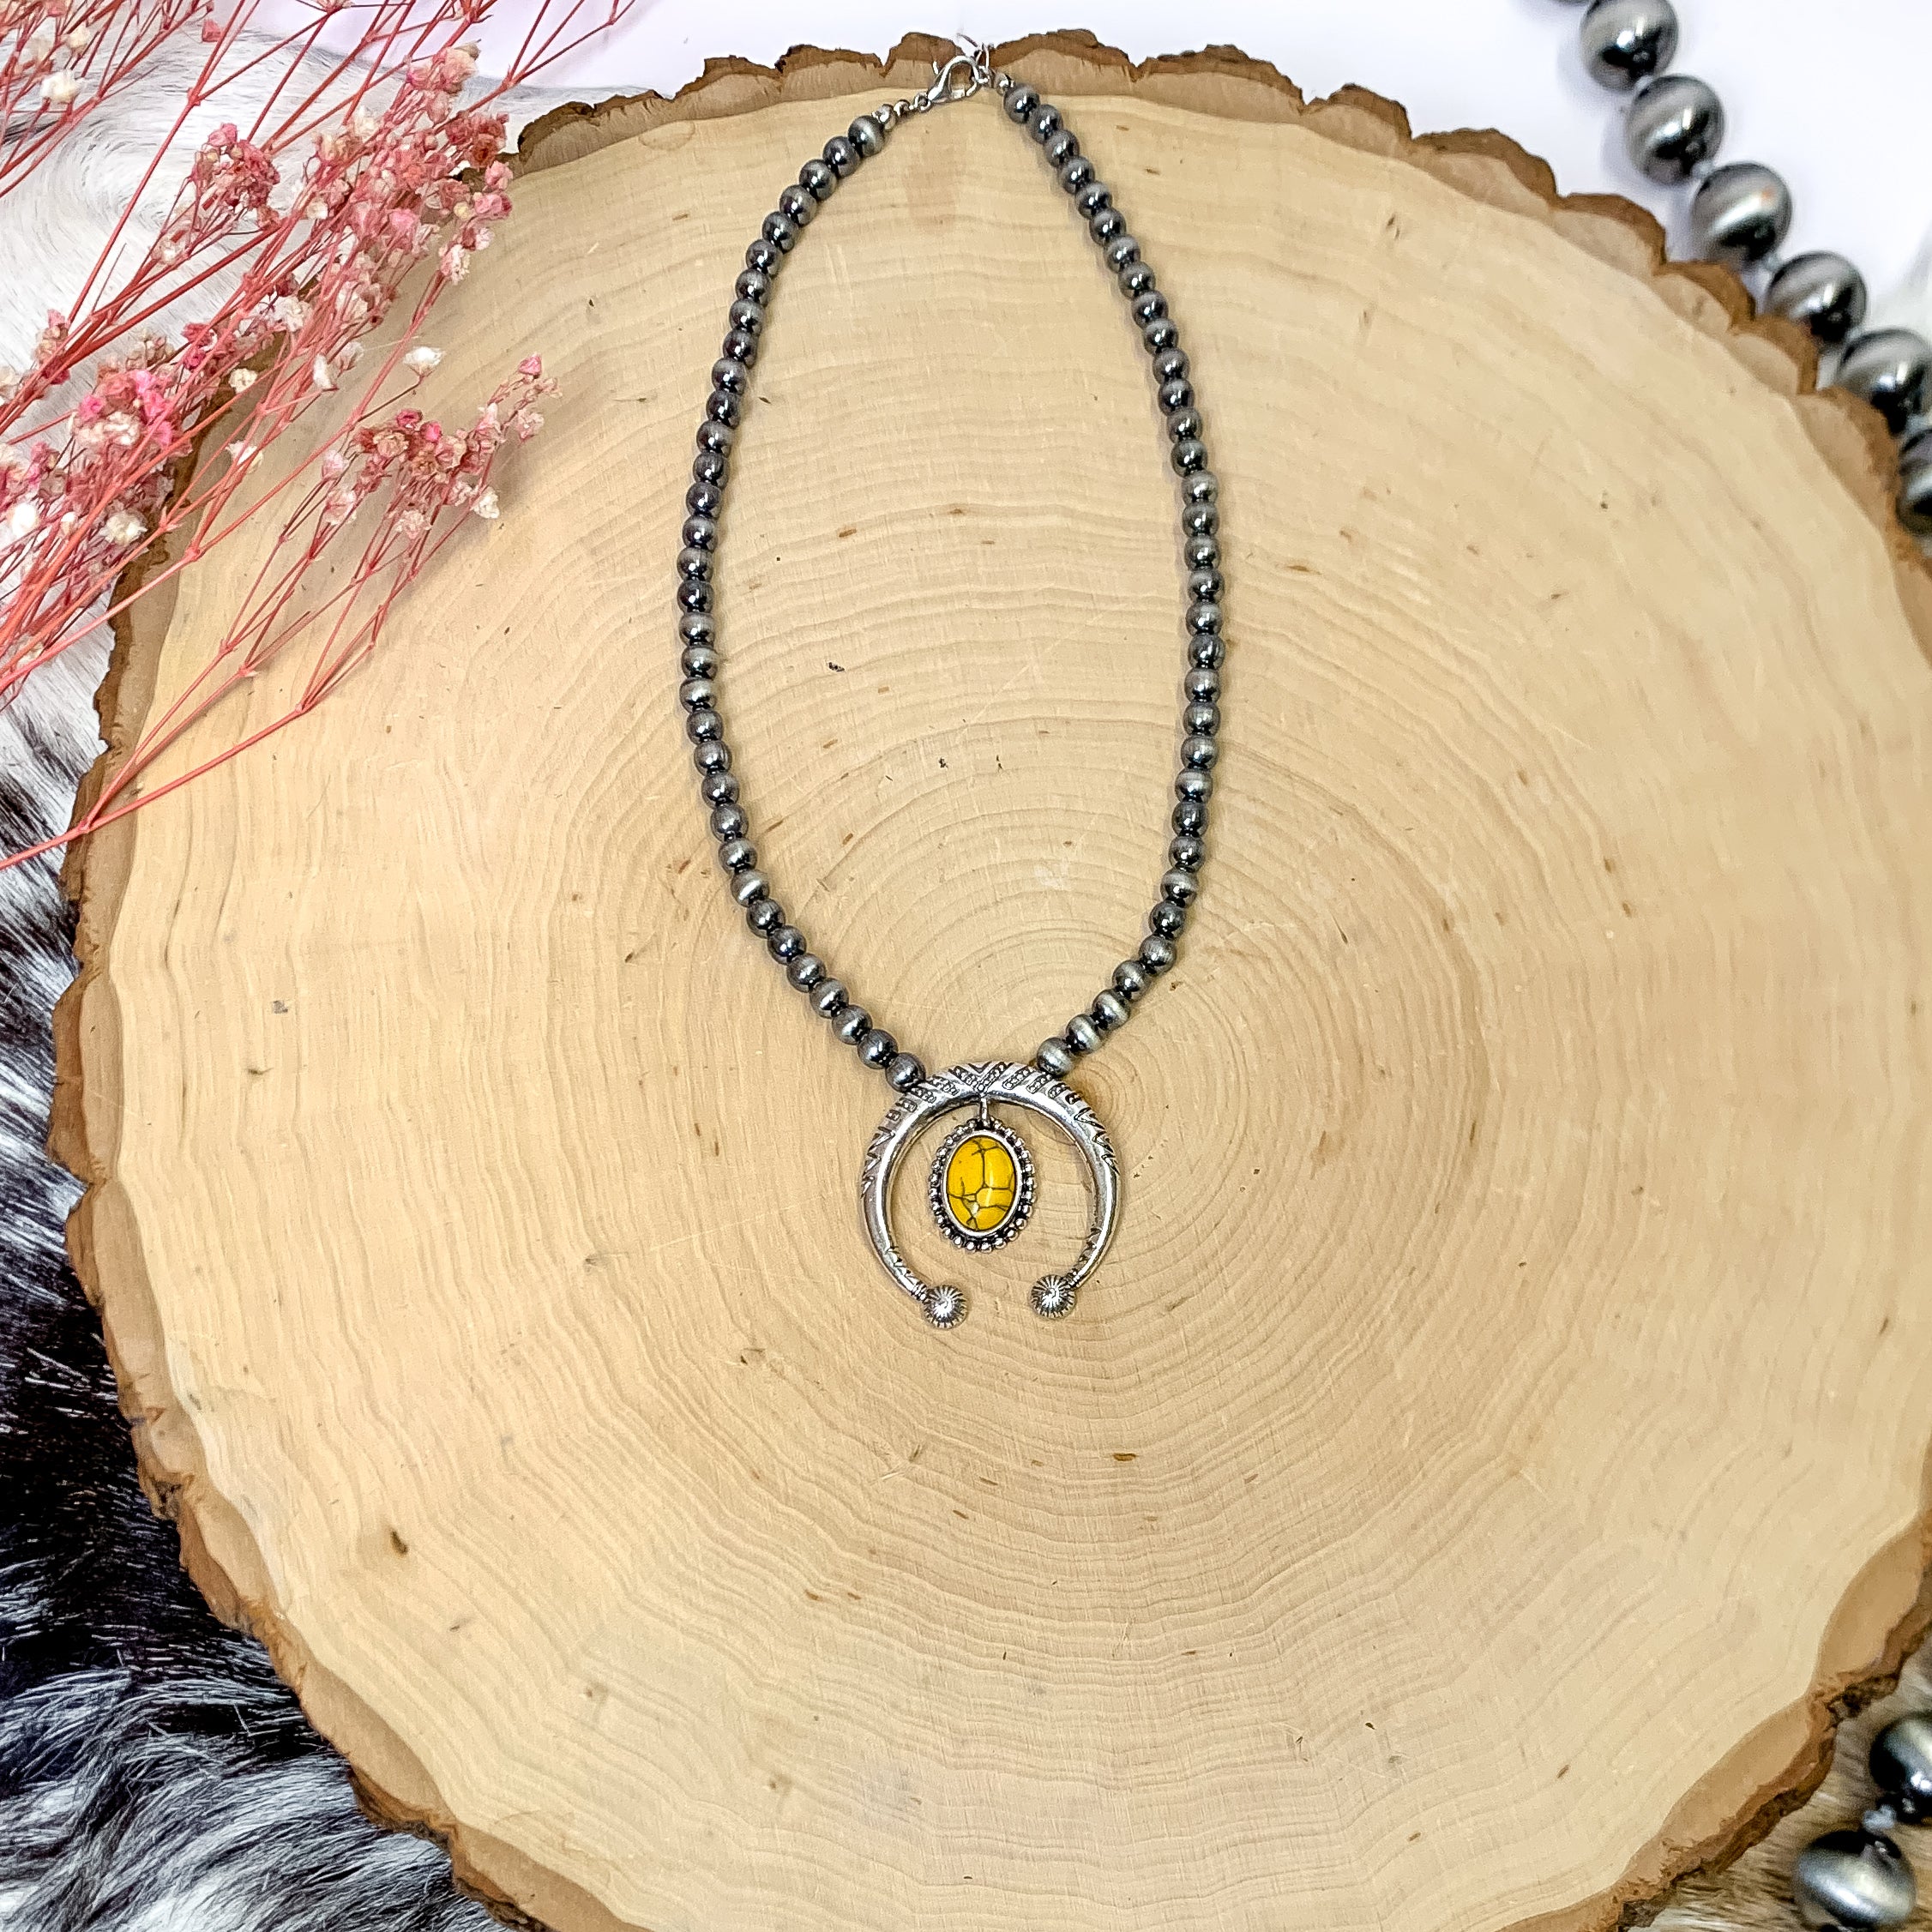 Faux Navajo Pearl Silver Tone Necklace with Naja Pendant and Oval Stone Dangle in Mustard Yellow